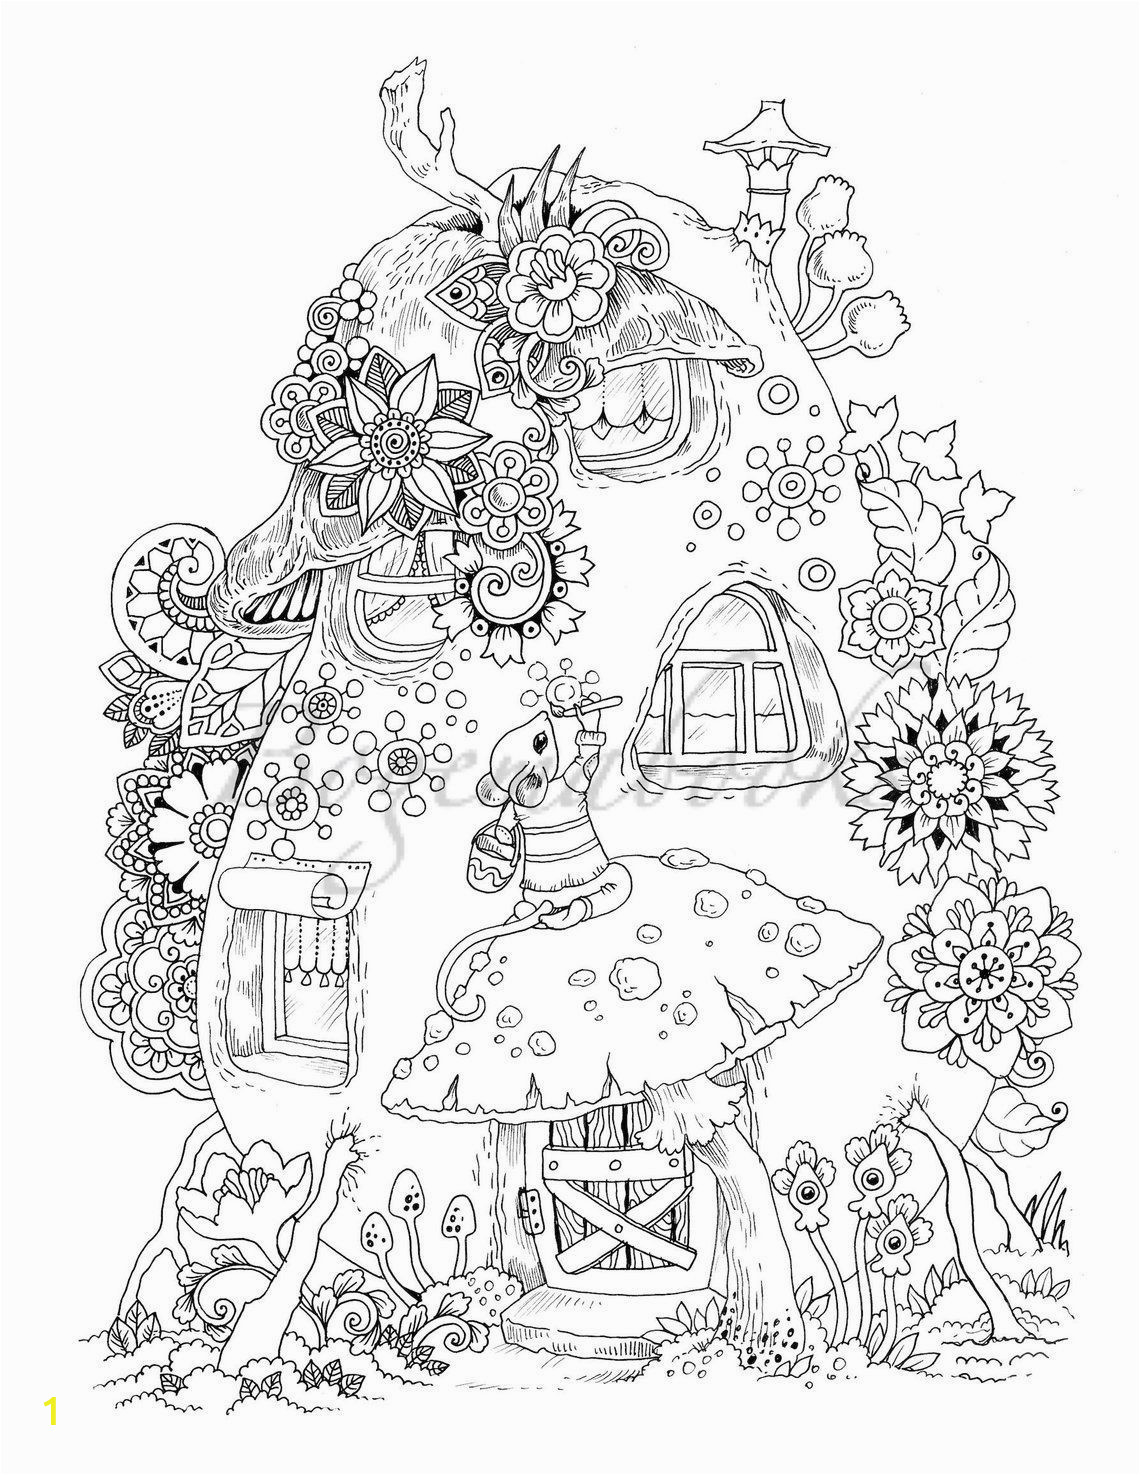 Coloring Pages for Kids Pdf Nice Little town 6 Adult Coloring Book Coloring Pages Pdf